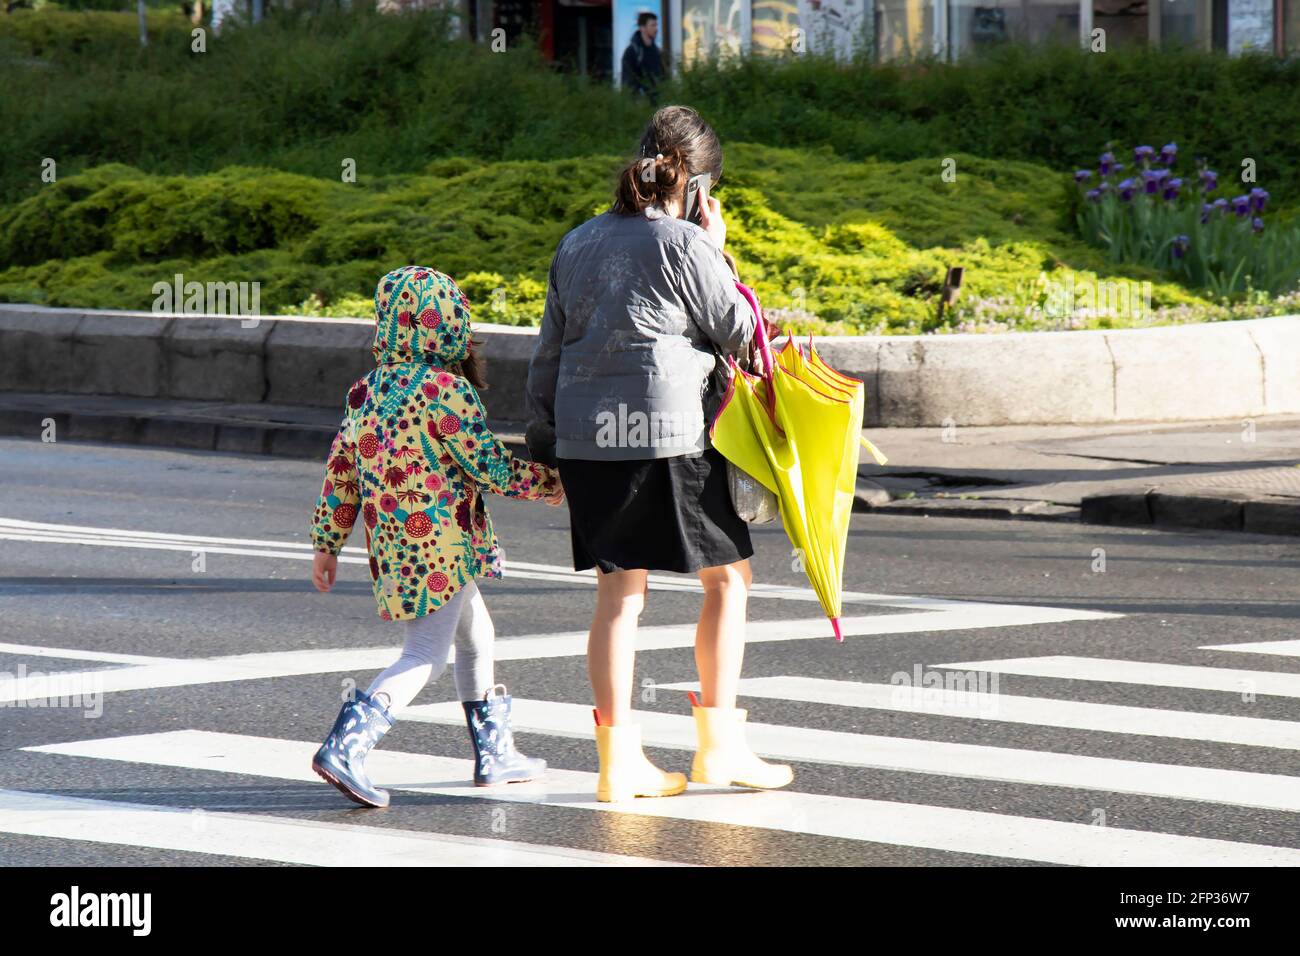 Belgrade, Serbia - May 13, 2021: Woman and a girl walking hand in hand while crossing the street on a bright sunny and rainy day Stock Photo